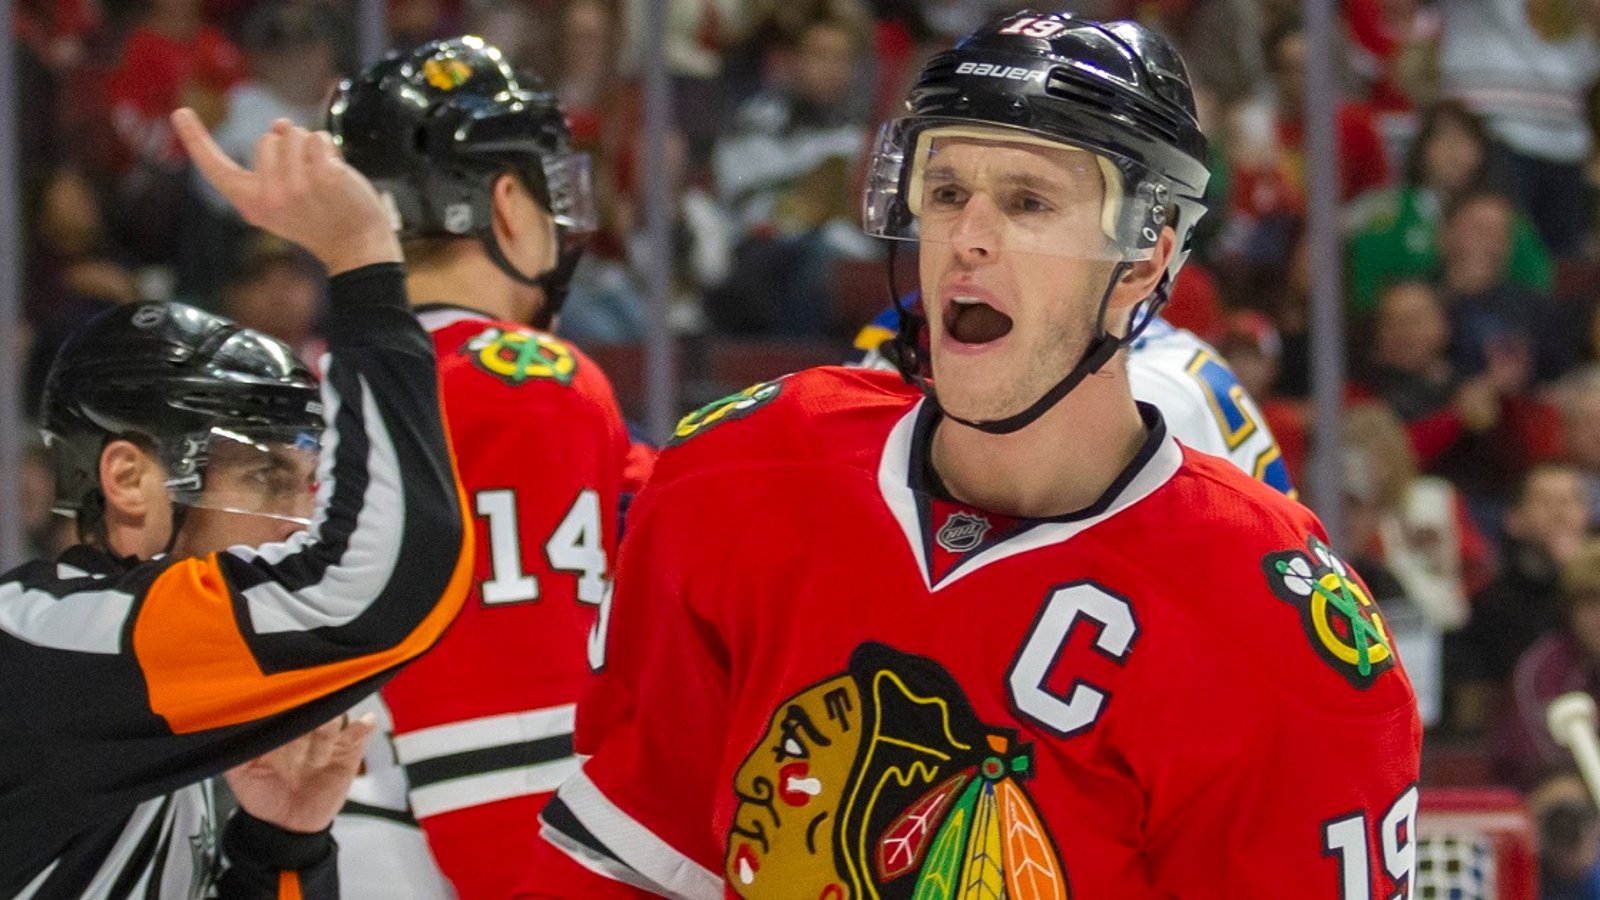 Breaking: Jonathan Toews appears to suffer minor injury in practice.